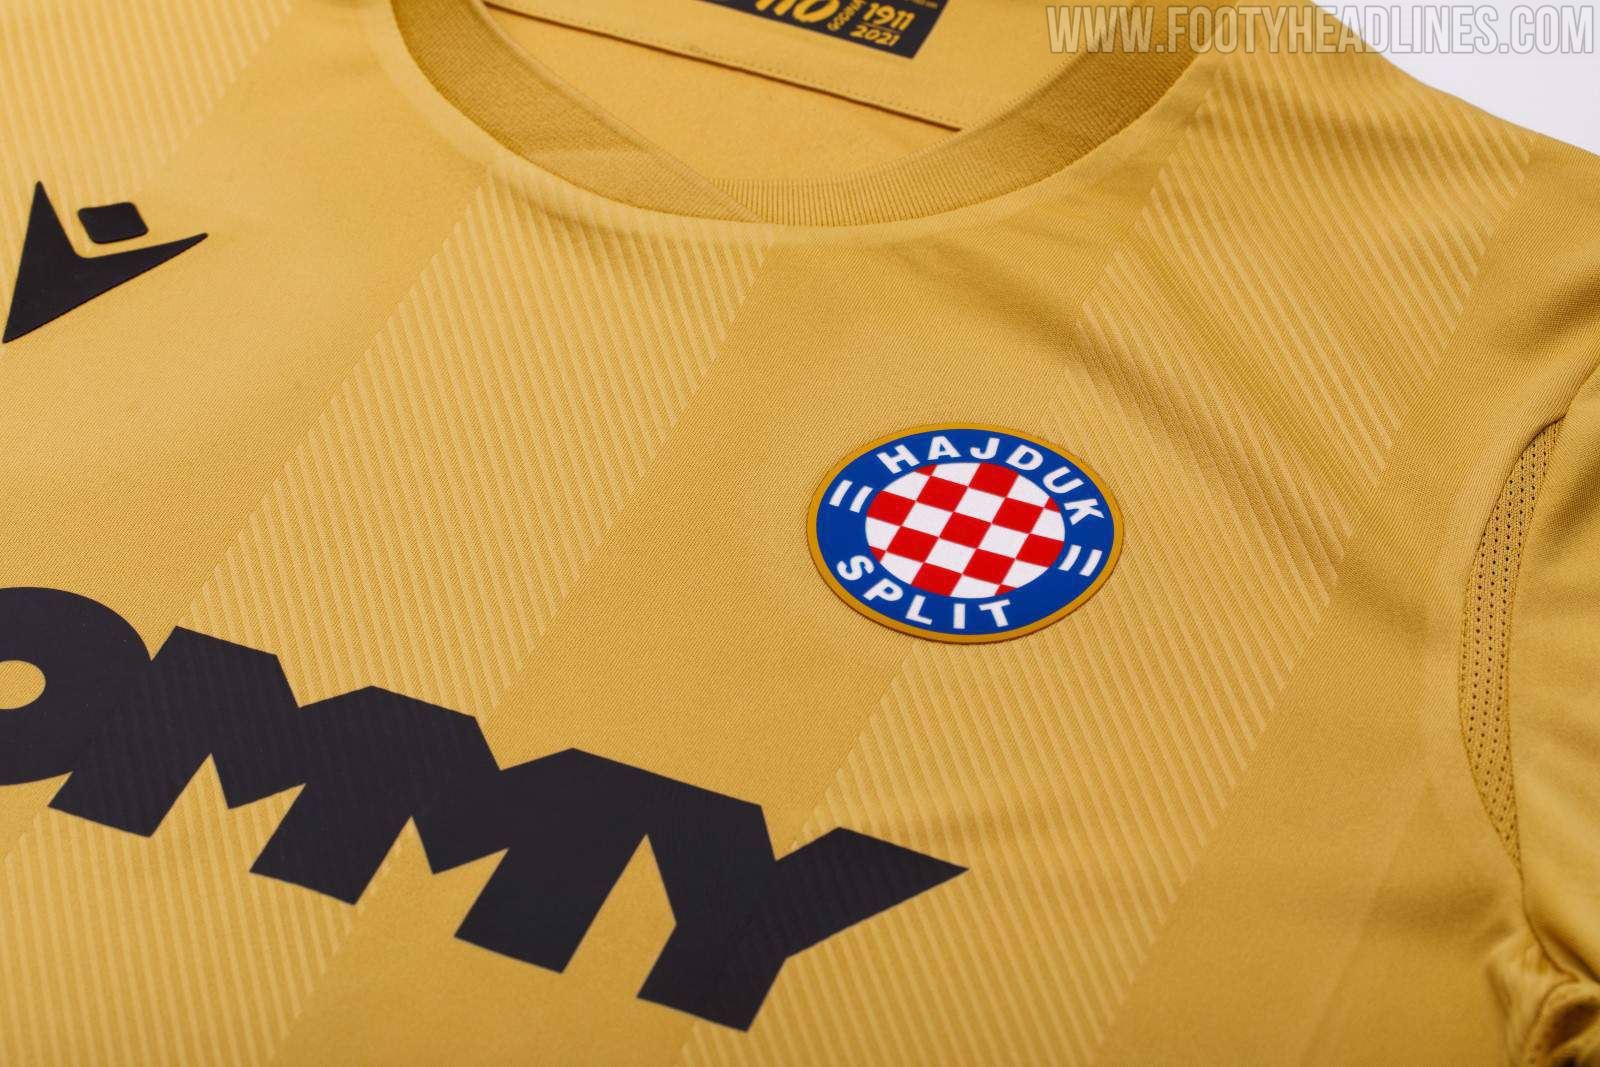 Amazing new third kit of Hajduk Split with fan names (that donated 1911  kuna to club) engraved on it : r/soccer